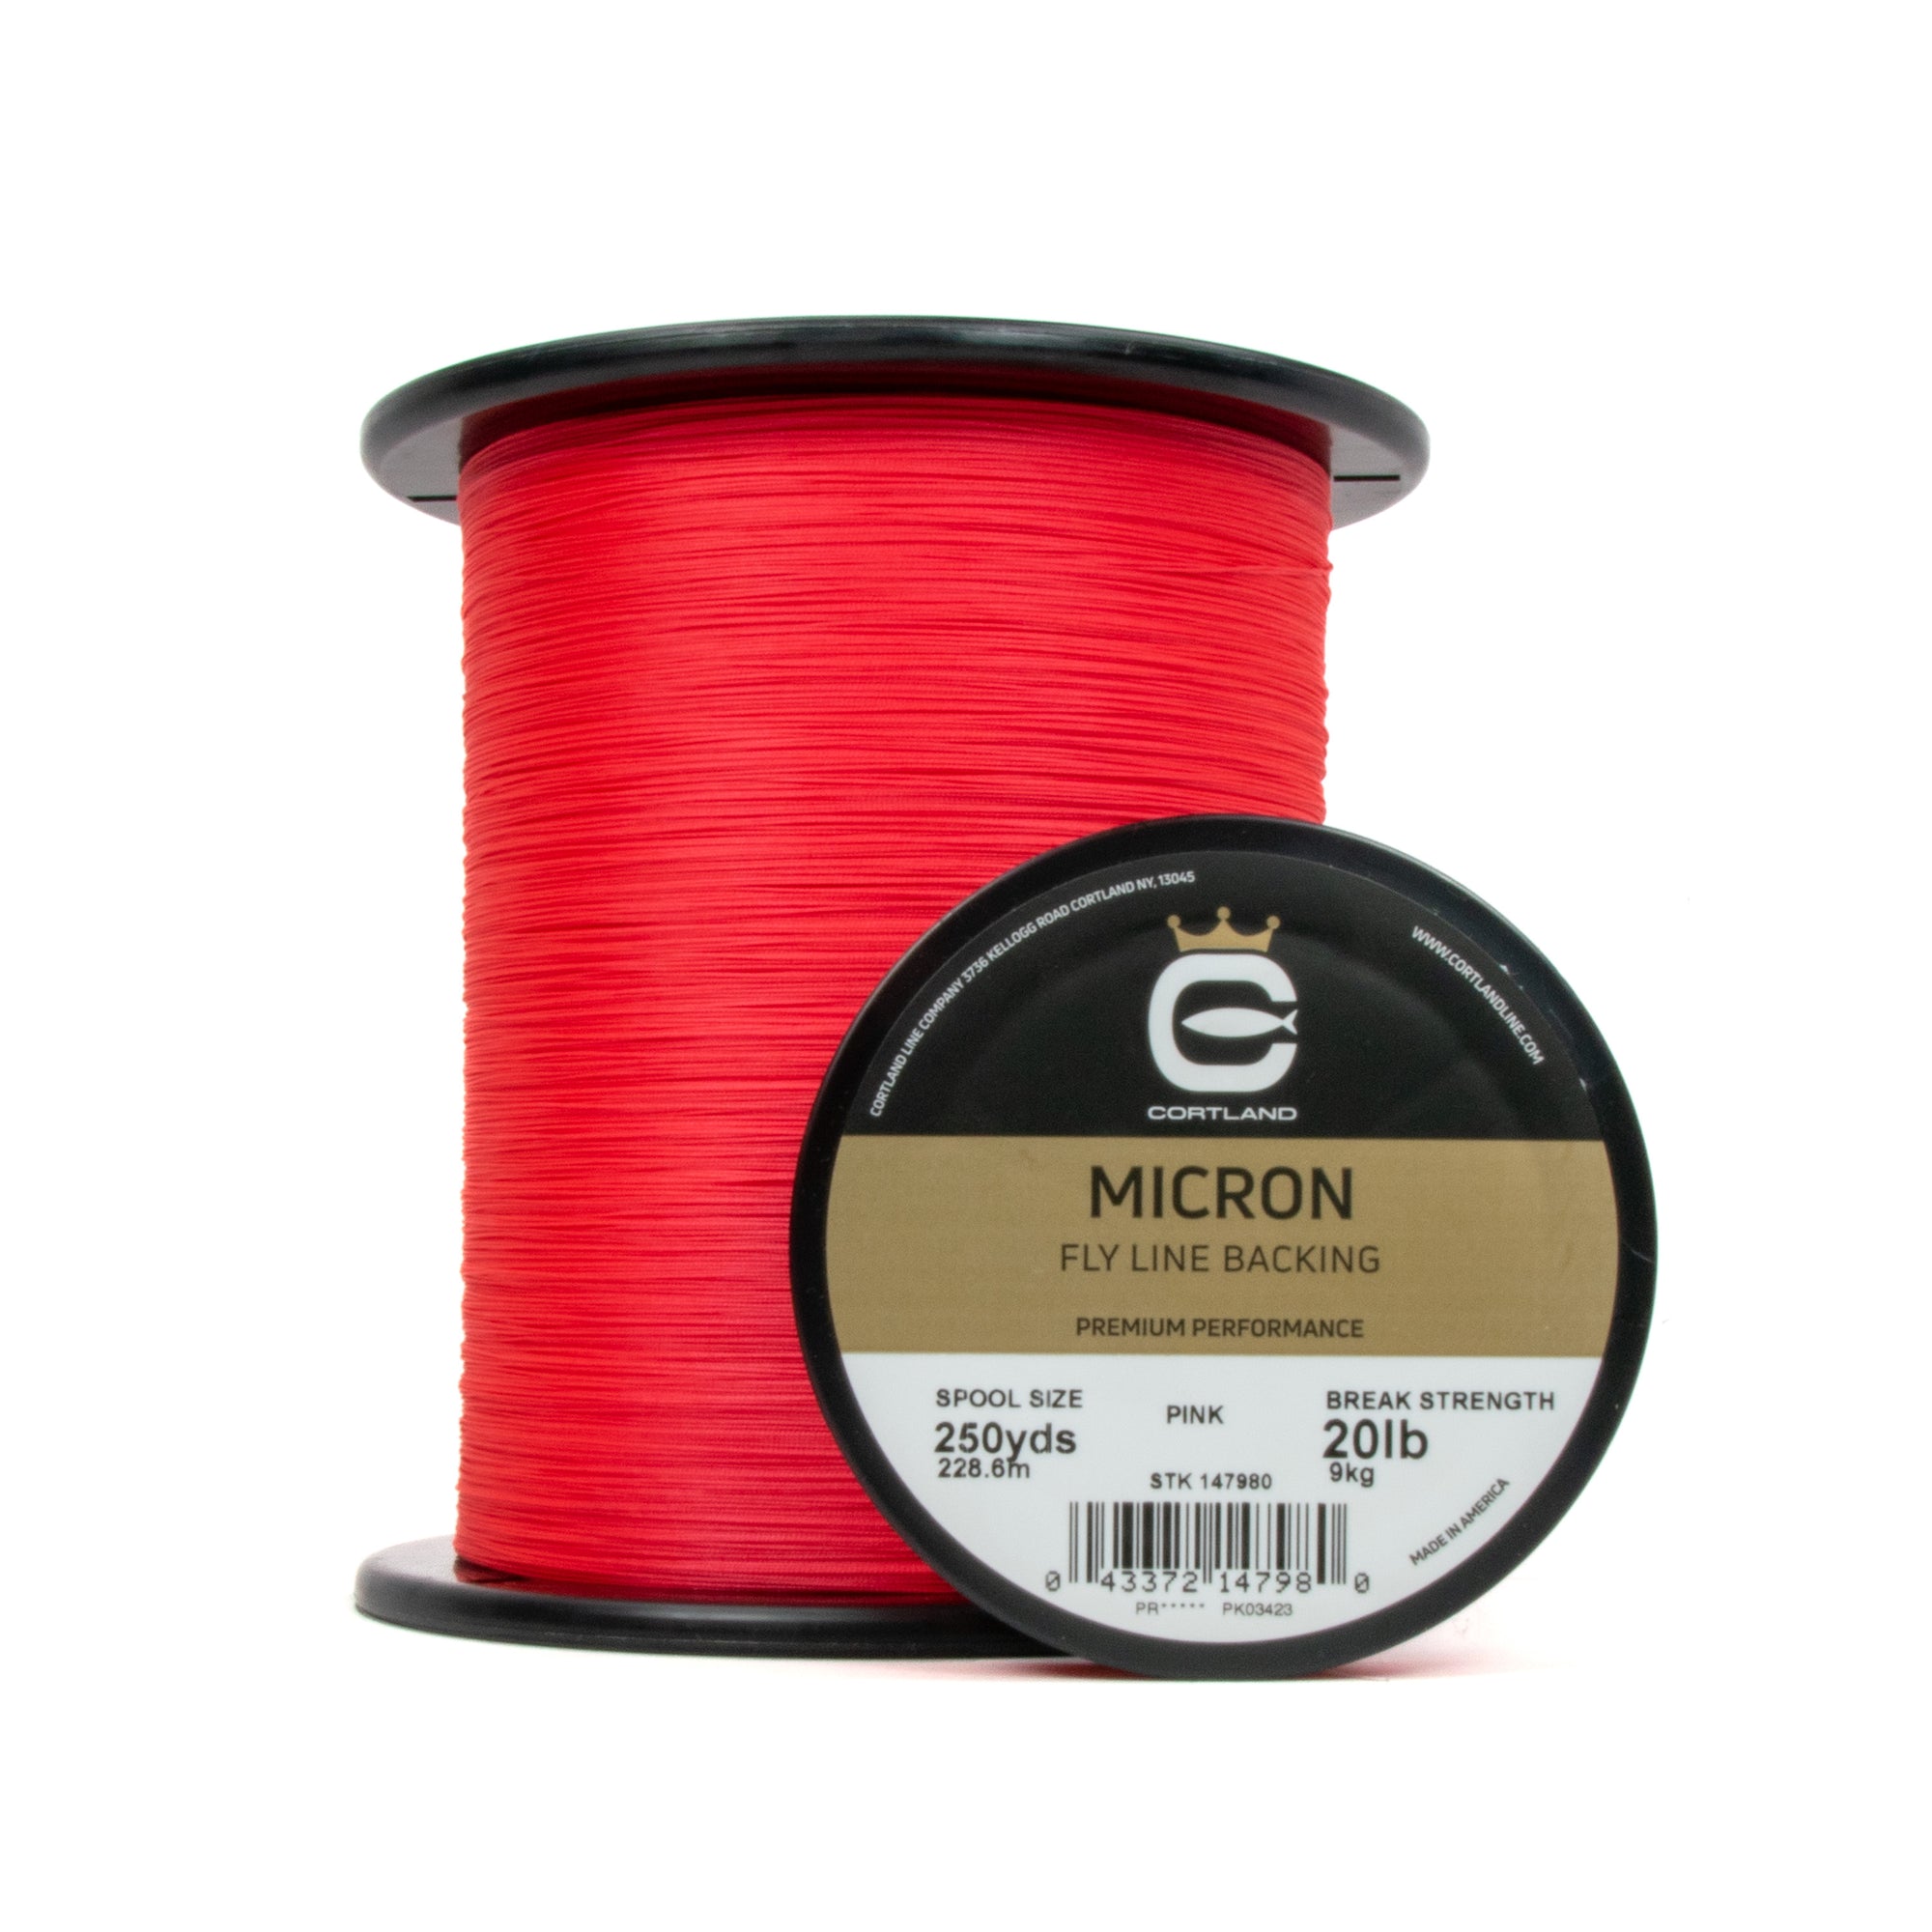 Micron Fly Line Backing - Pink